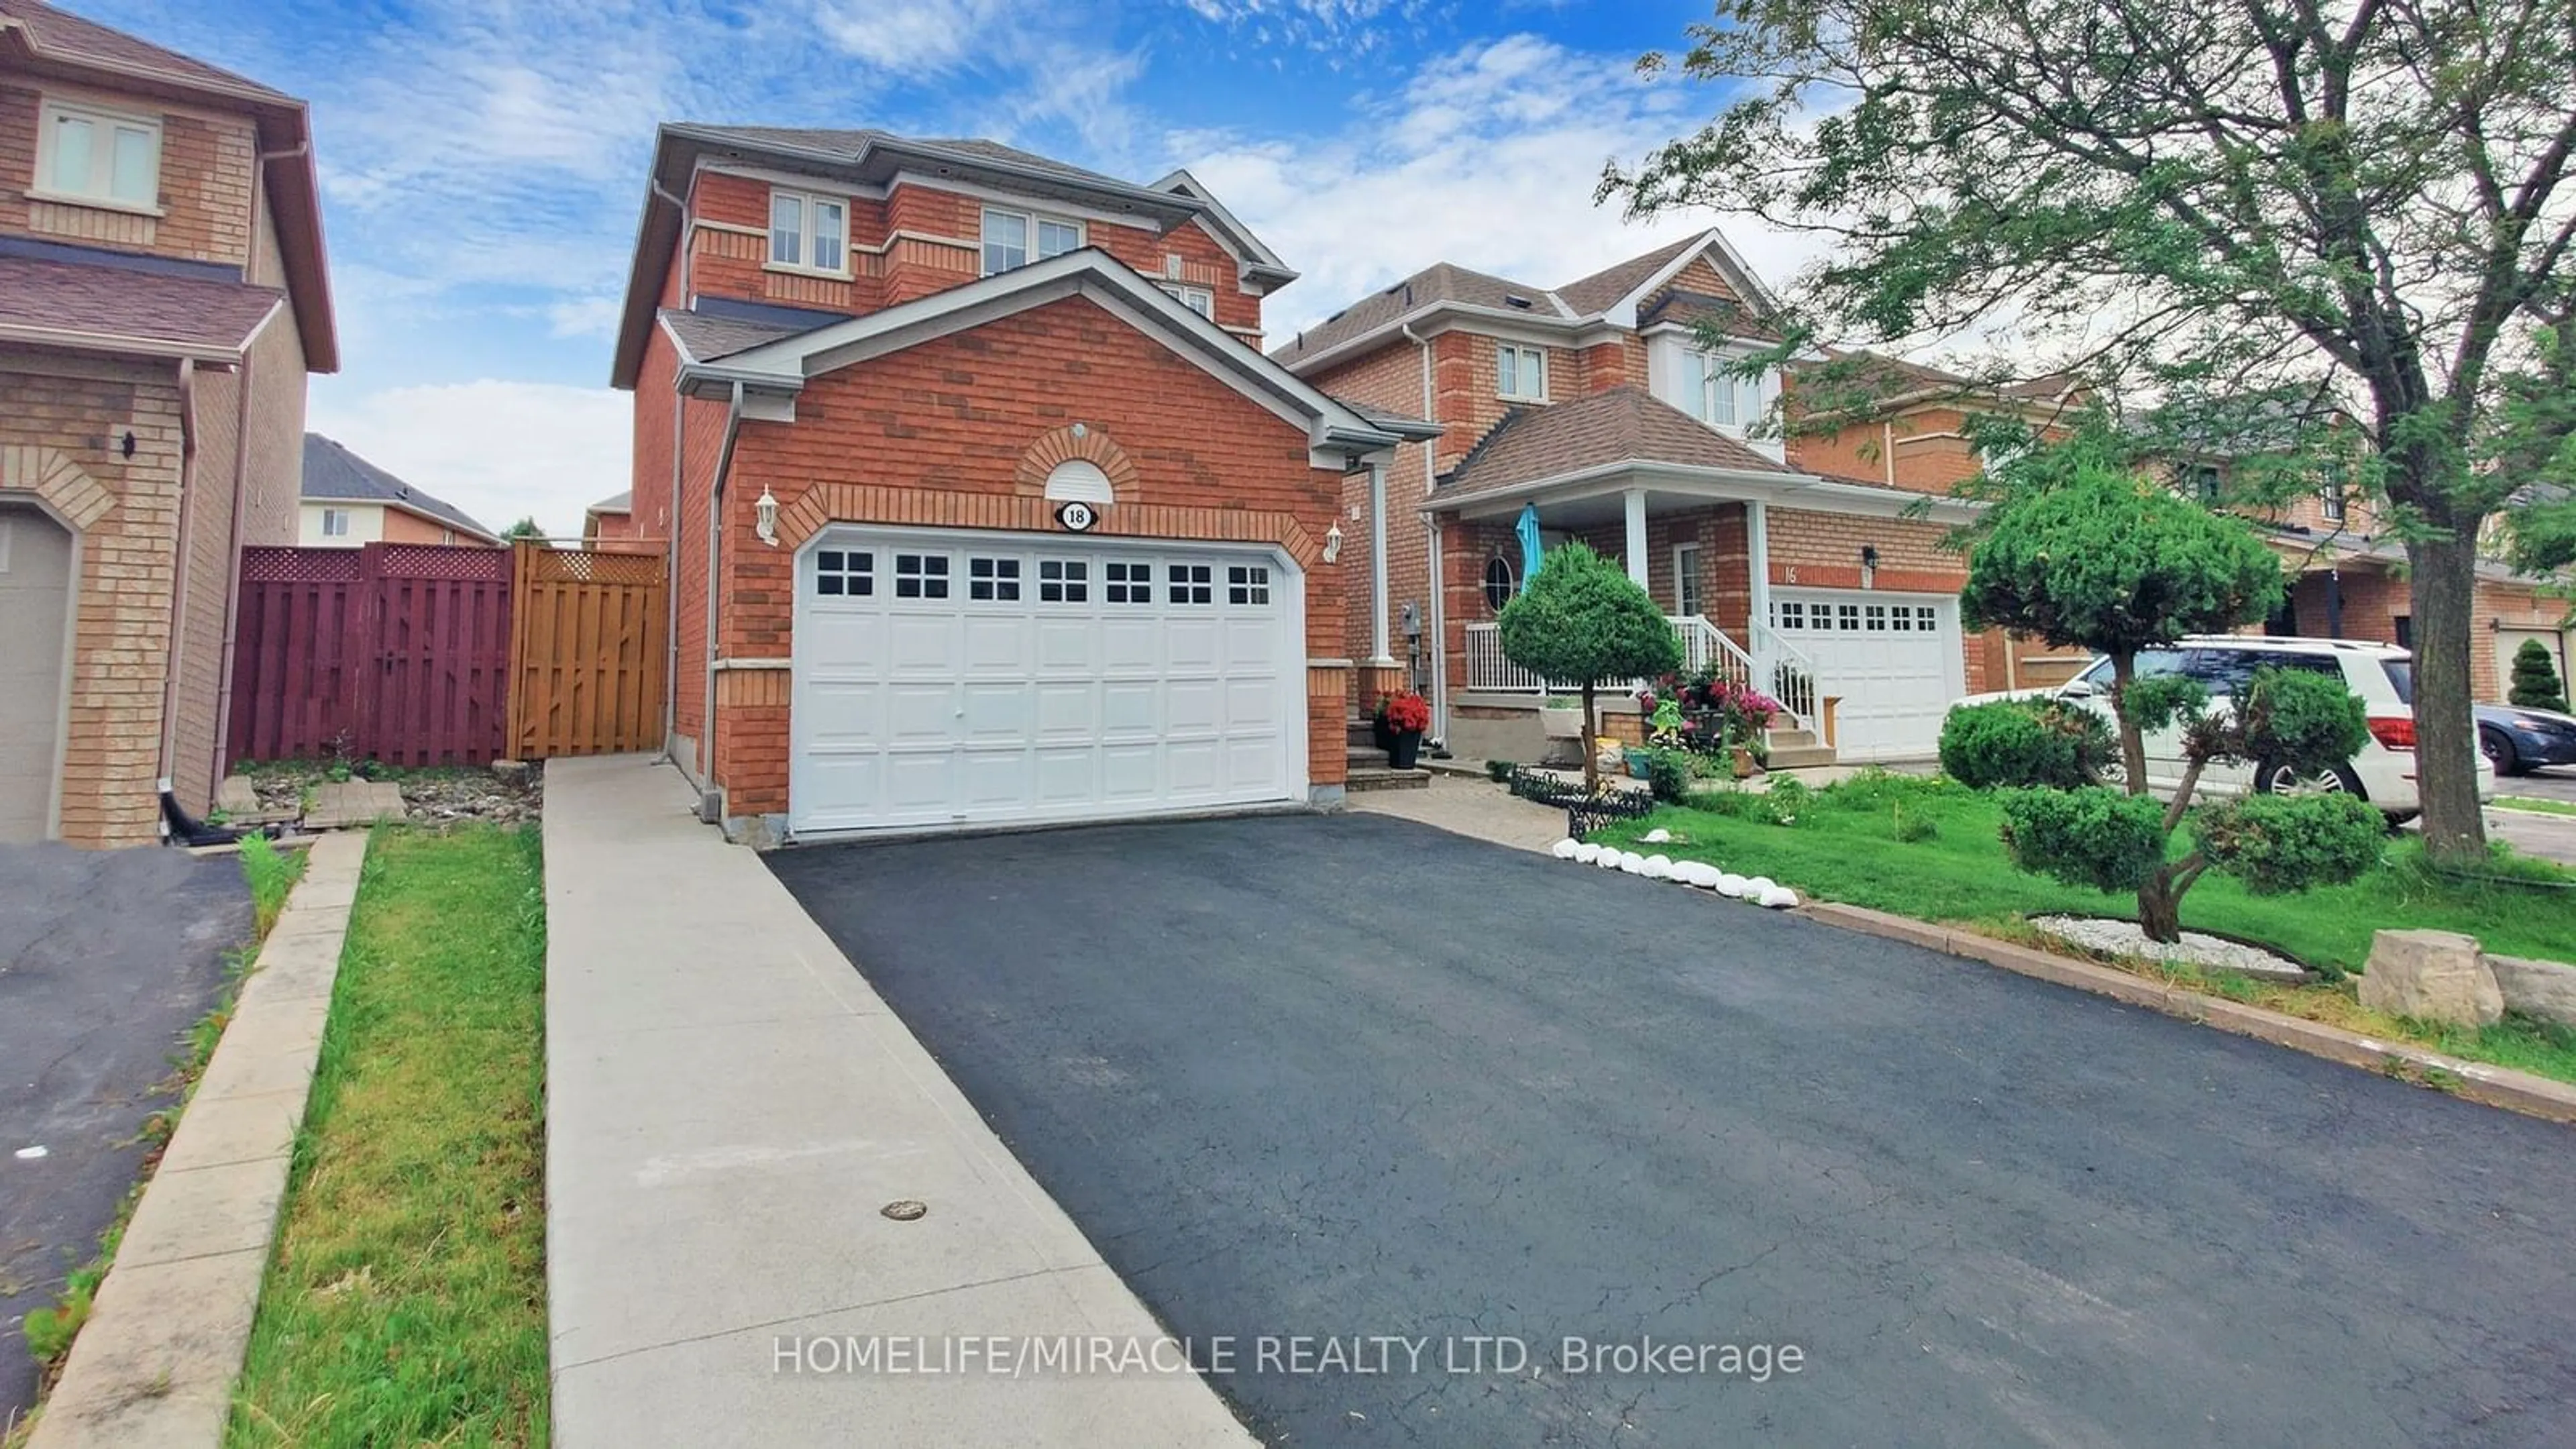 Frontside or backside of a home for 18 Sunny Glen Cres, Brampton Ontario L7A 2C6